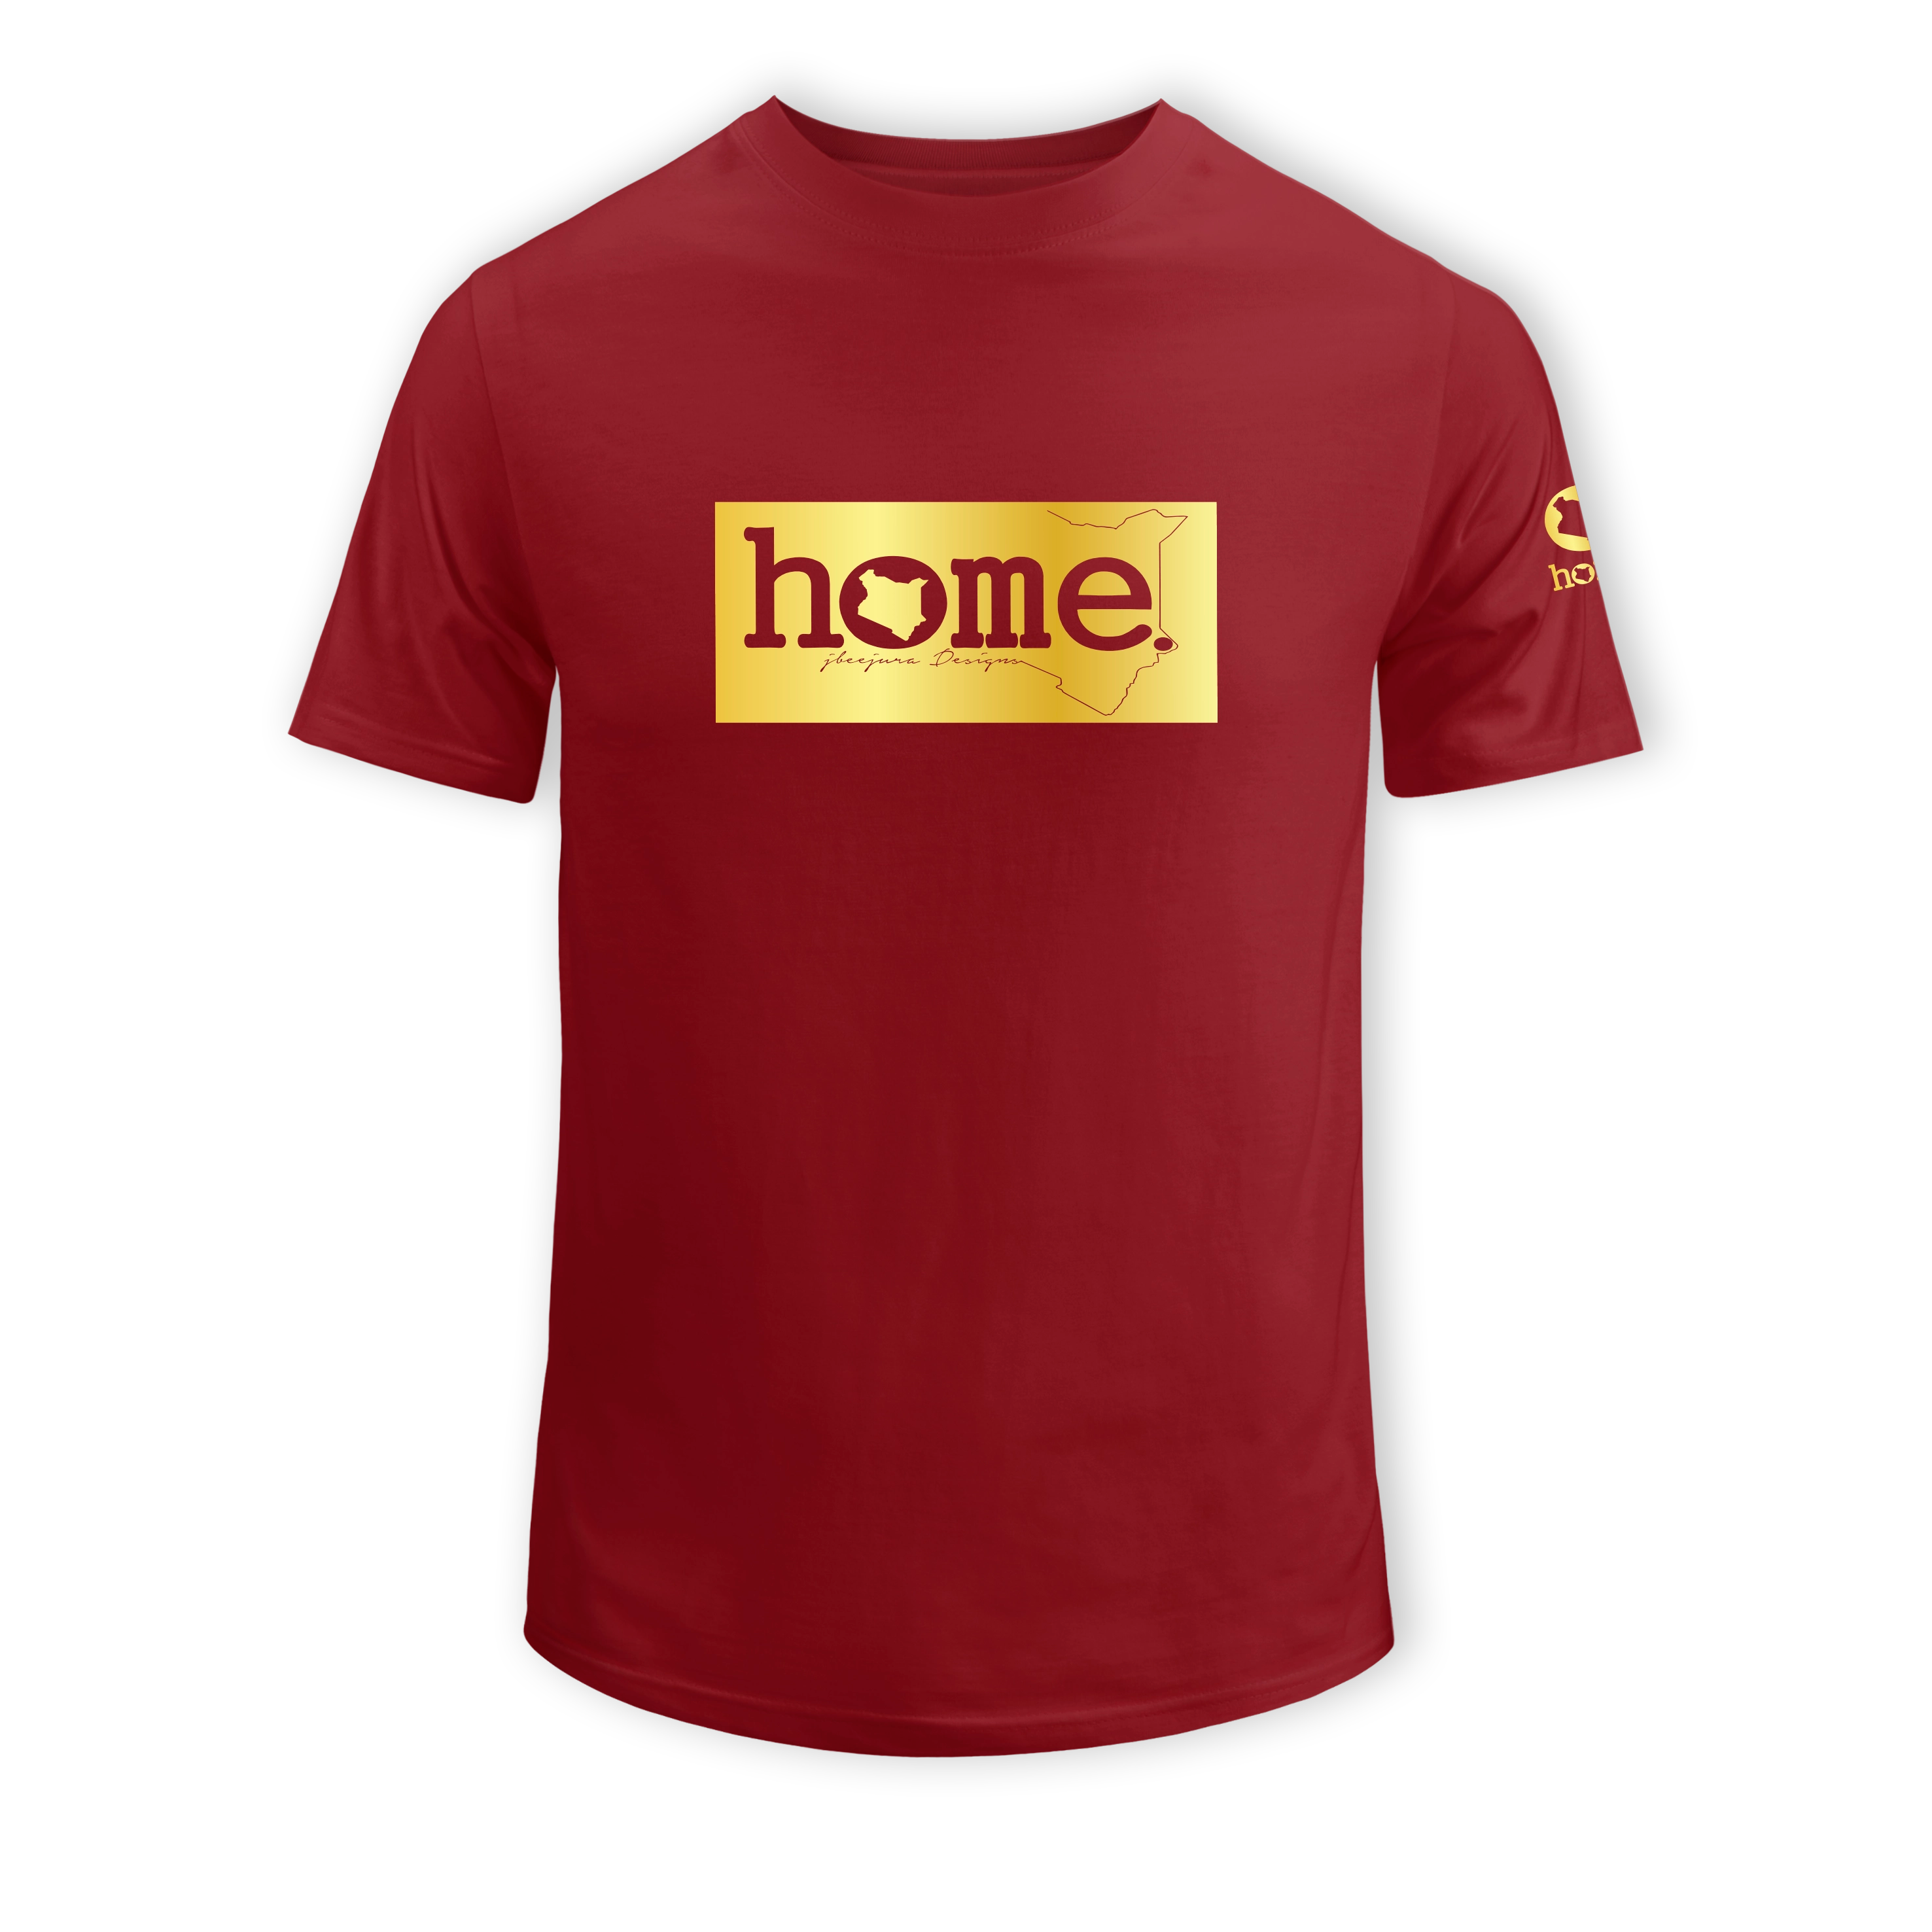 home_254 SHORT-SLEEVED MAROON RED T-SHIRT WITH A GOLD CLASSIC PRINT – COTTON PLUS FABRIC